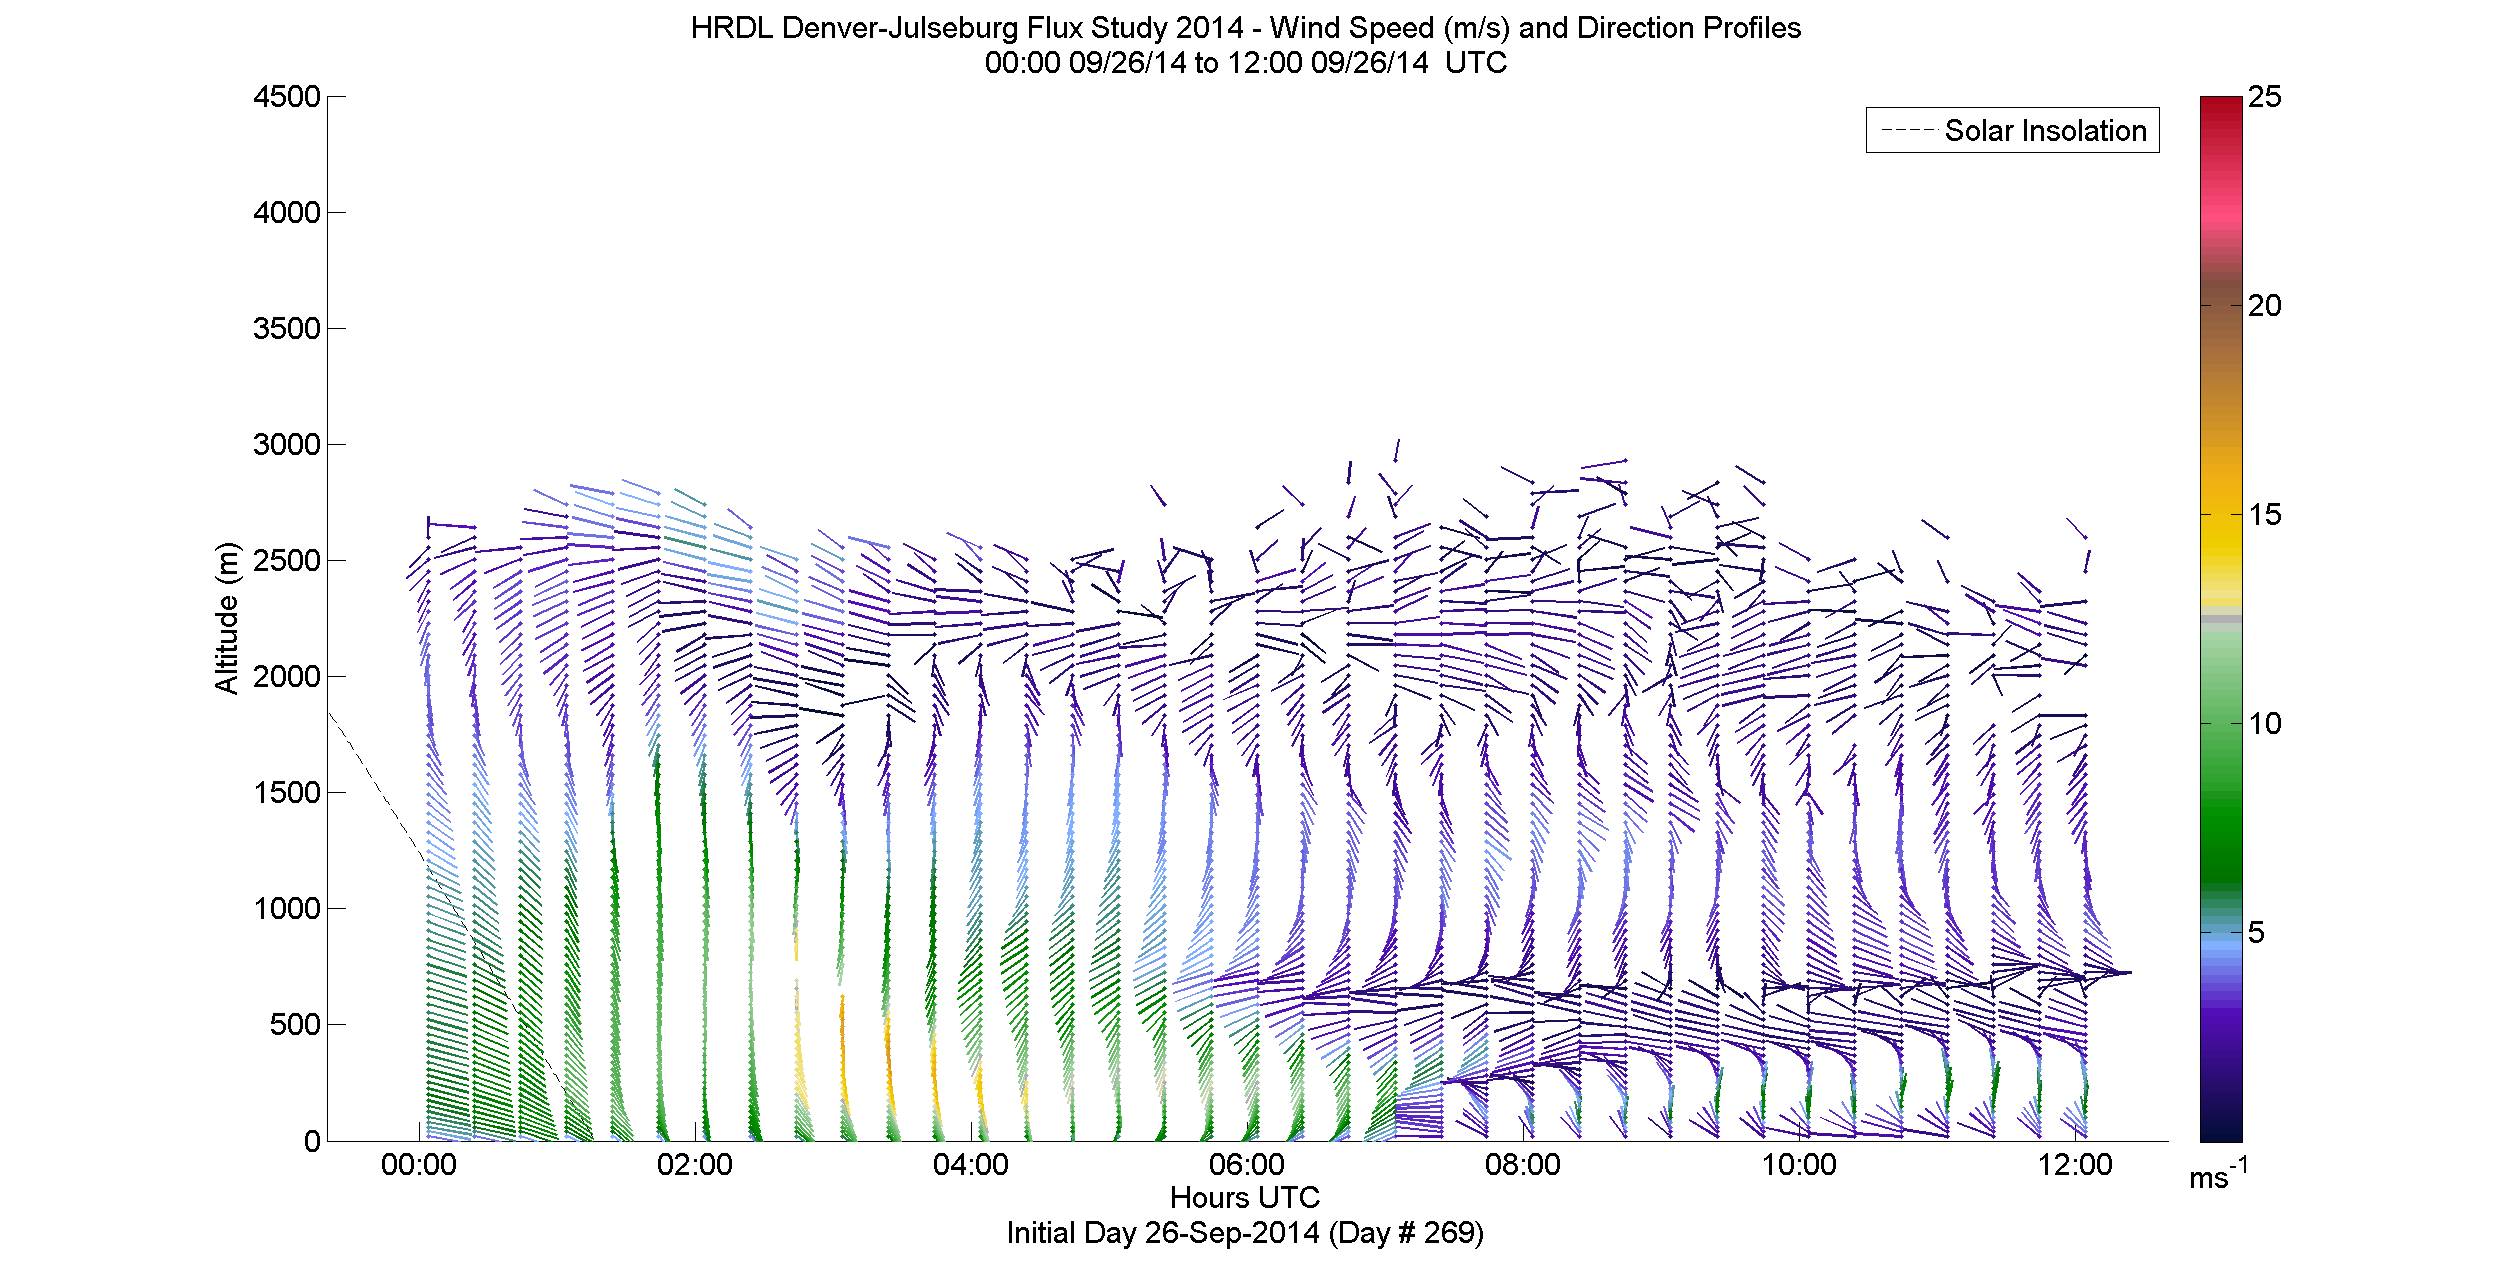 HRDL speed and direction profile - September 26 am